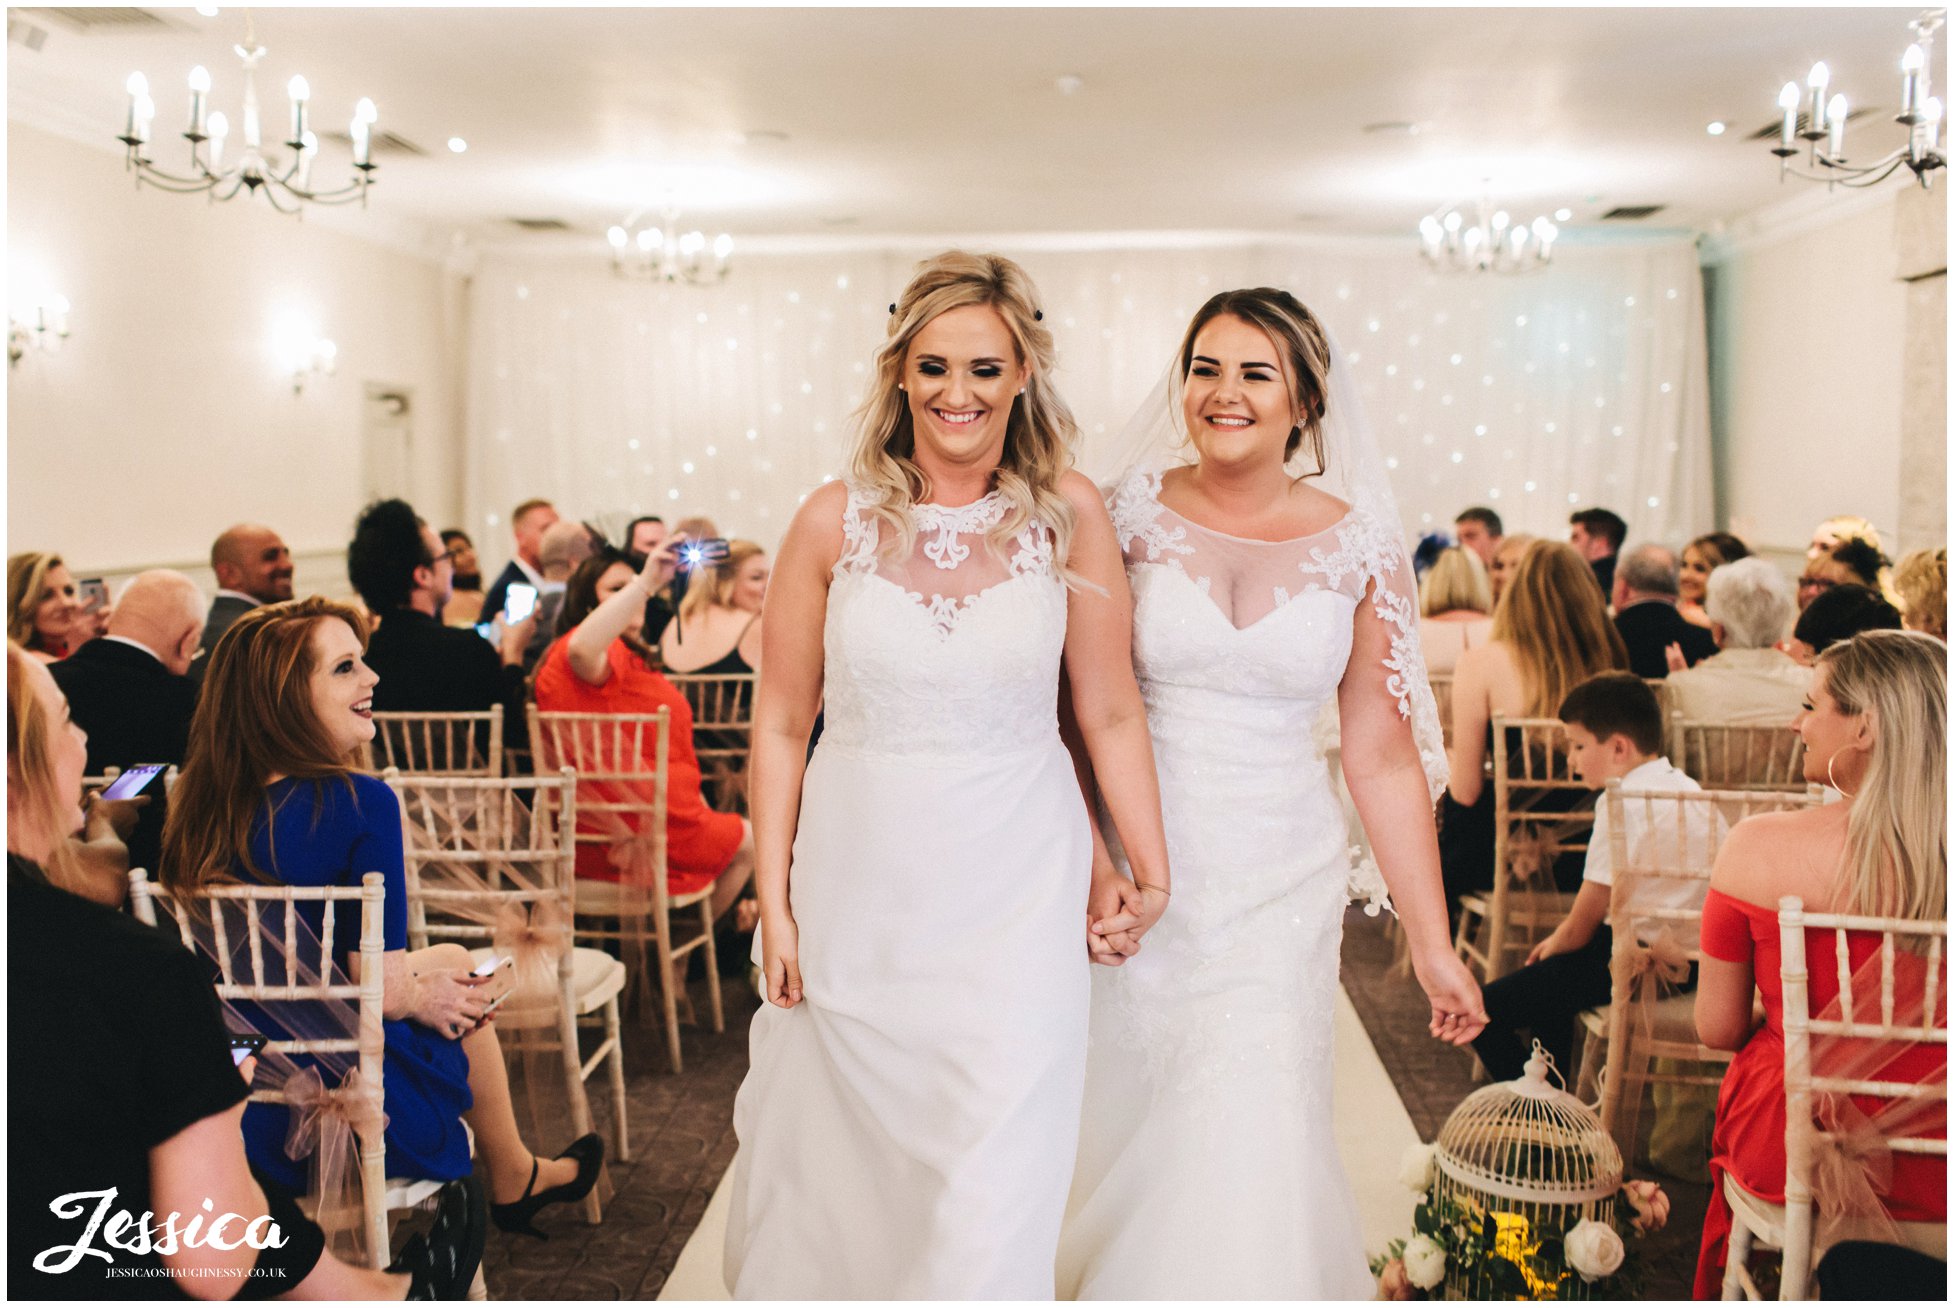 the brides laugh as they walk down the aisle as a married couple